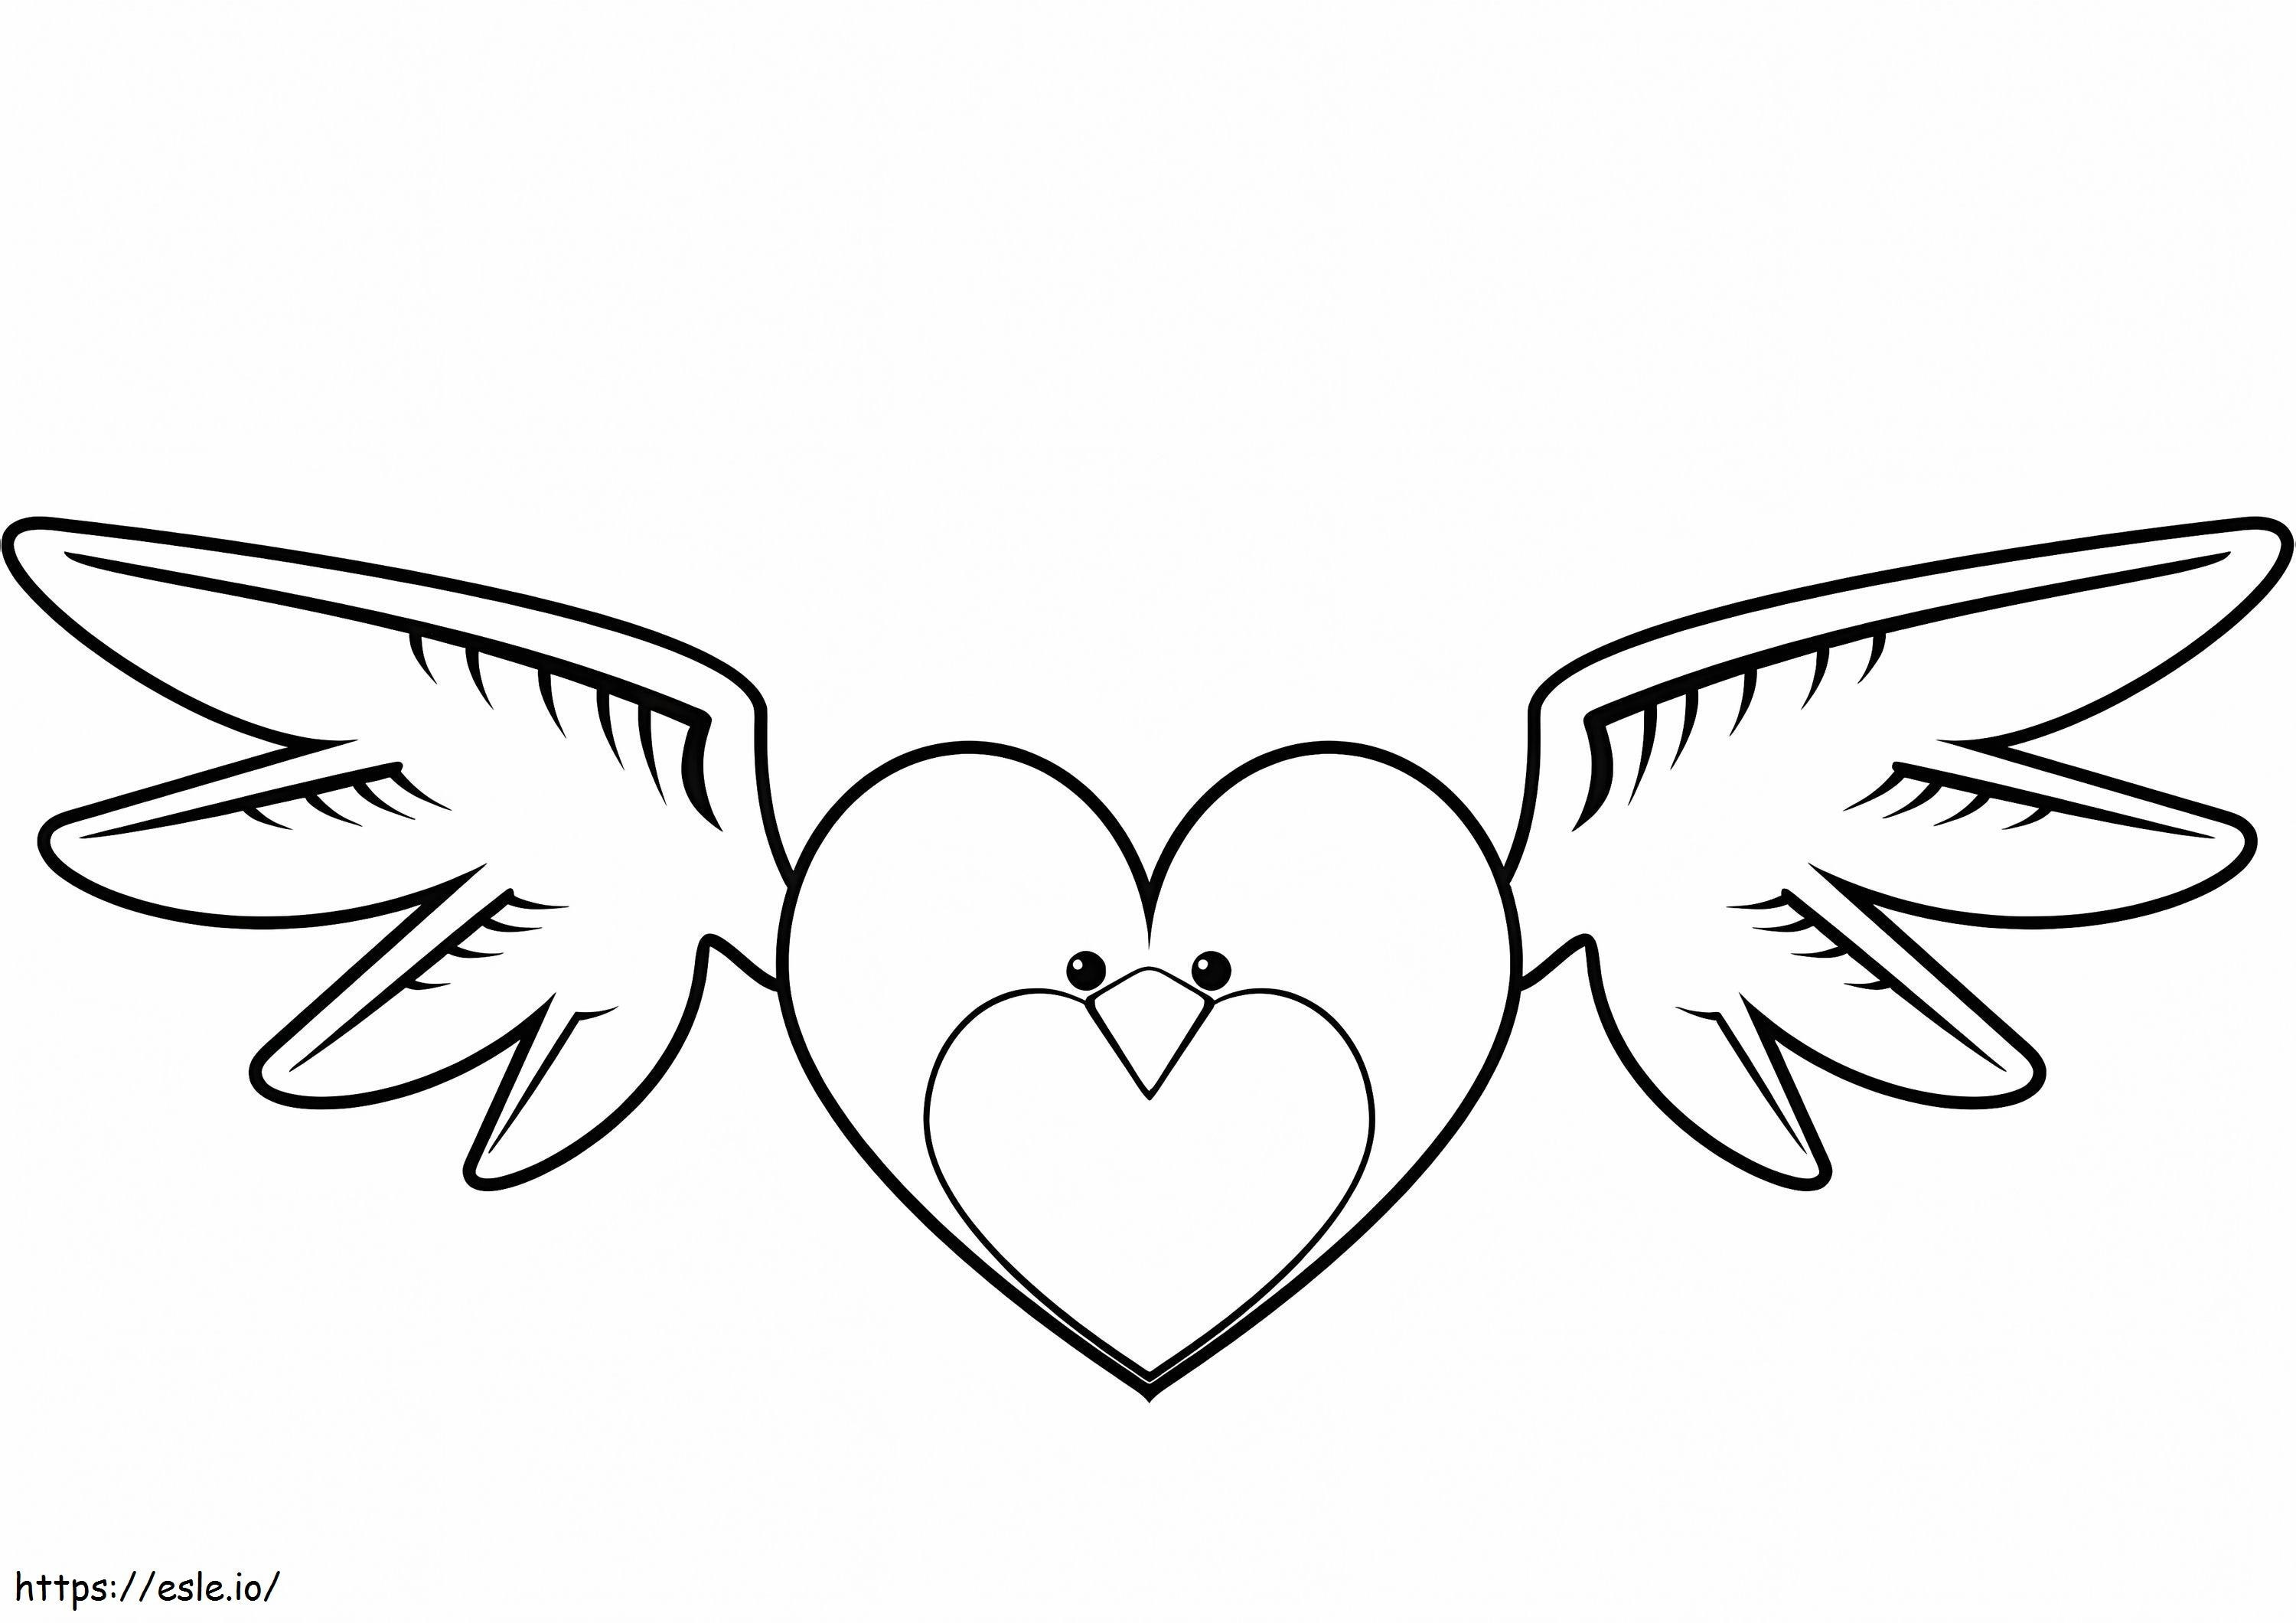 Bird Heart coloring page